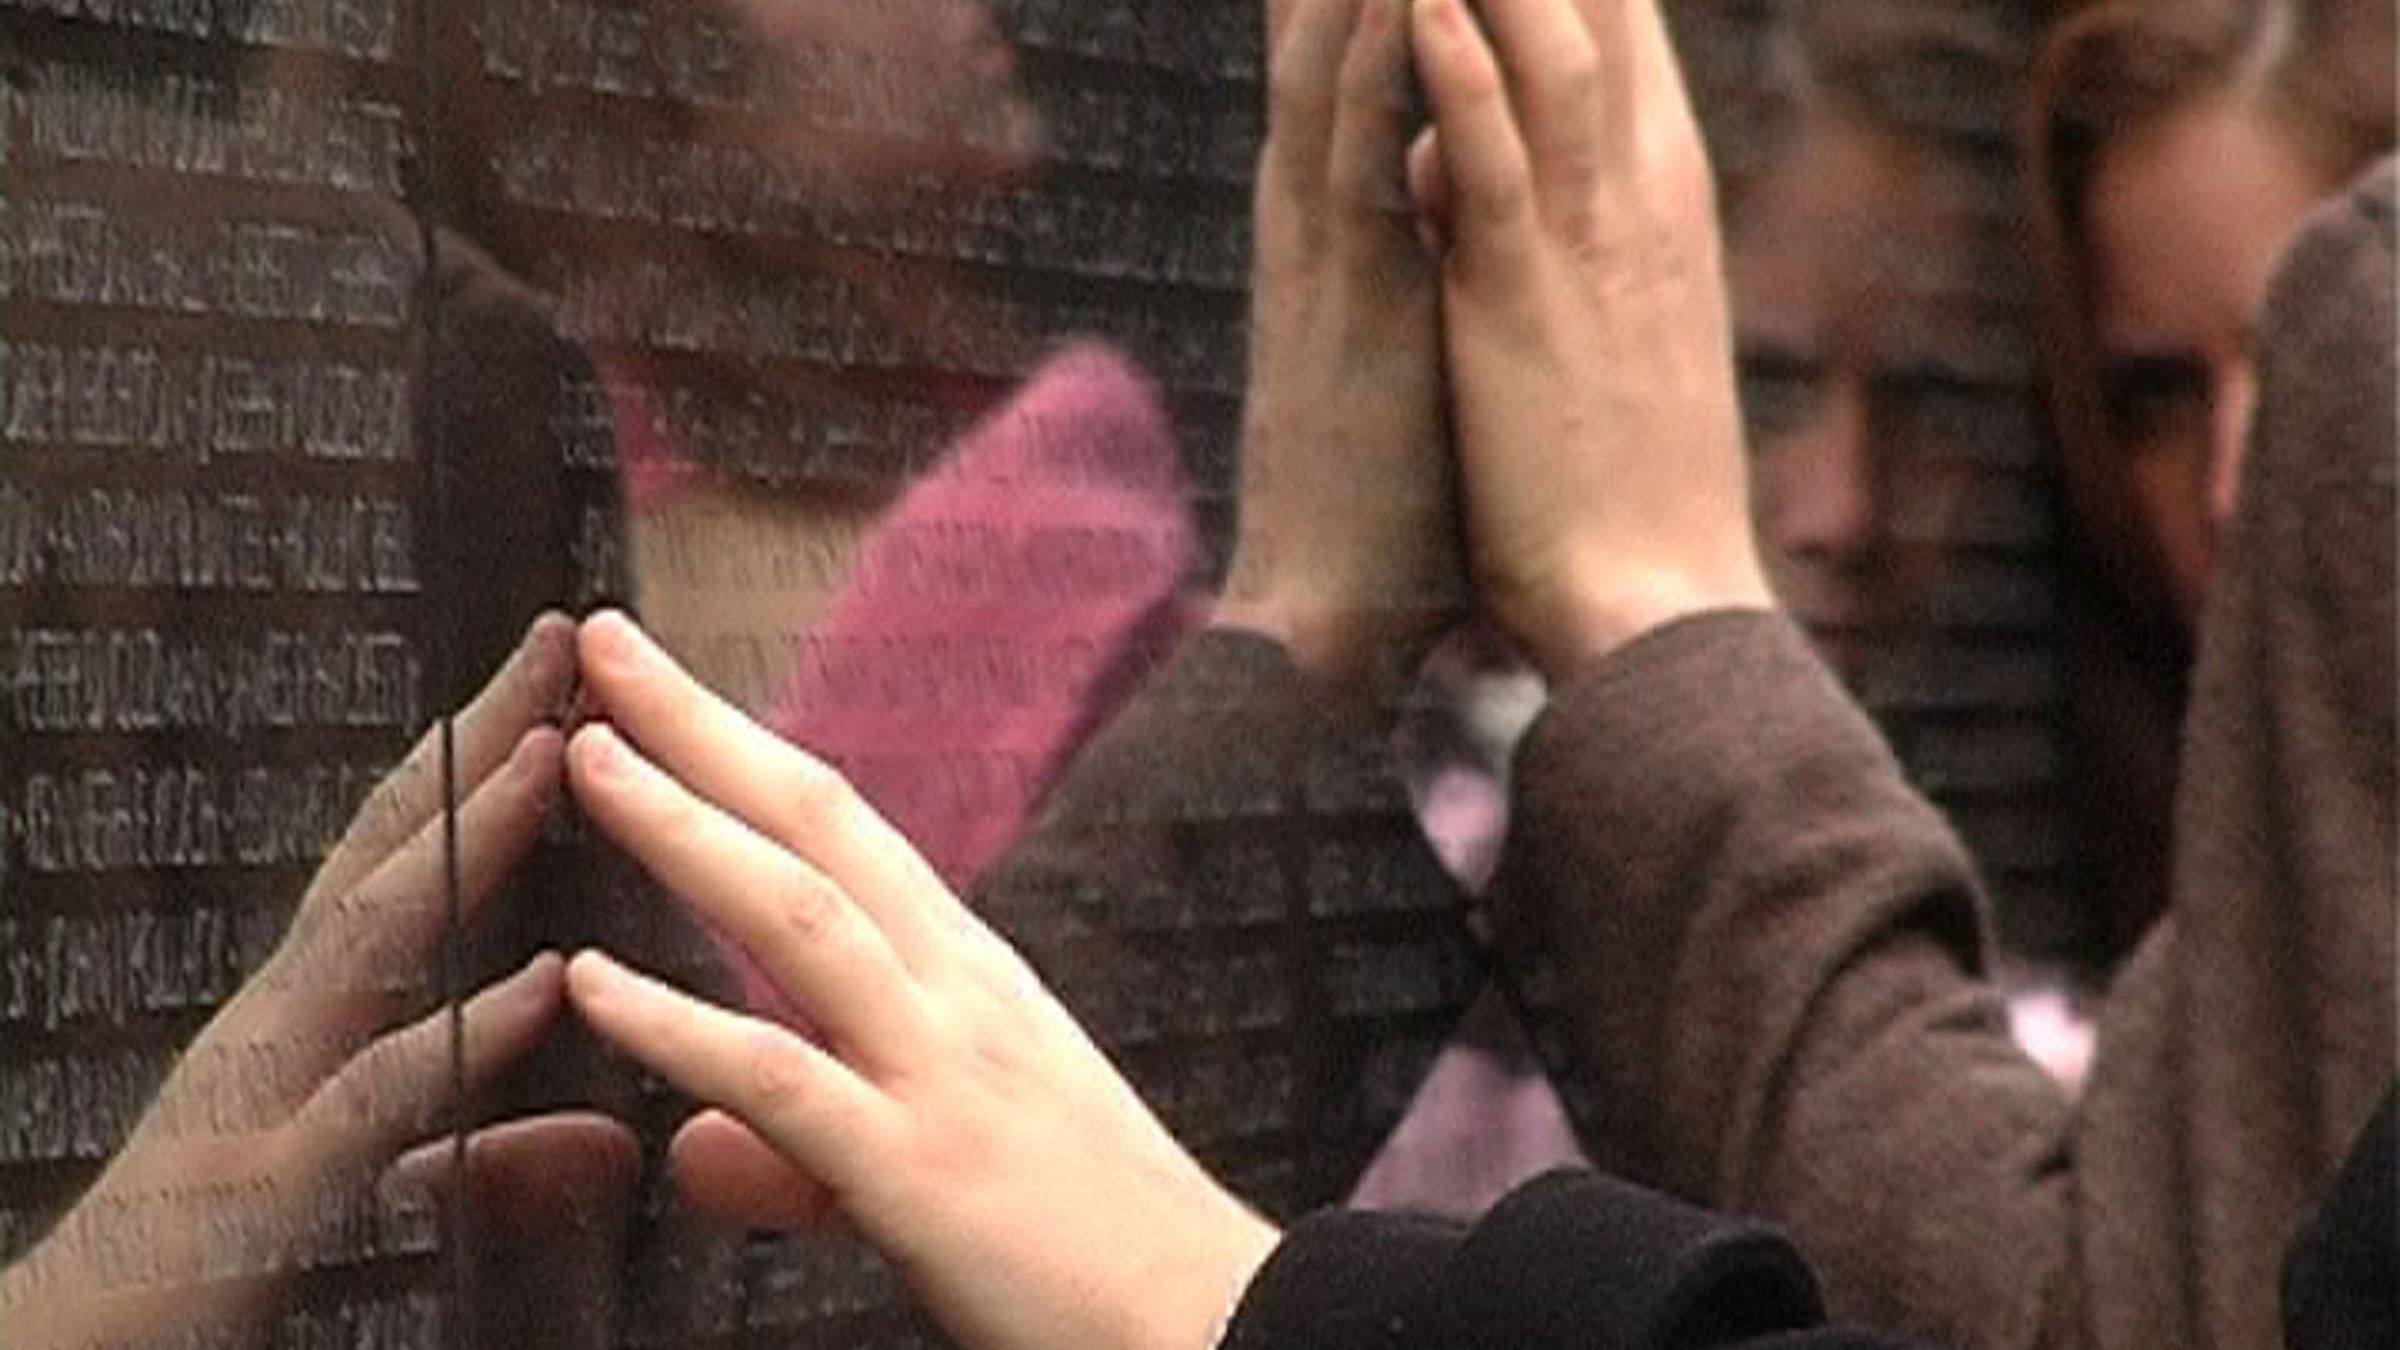 Video still of a close up shot of hands touching a black surface with engraved letters. The surface is polished and the reflection of some people's faces can be seen.